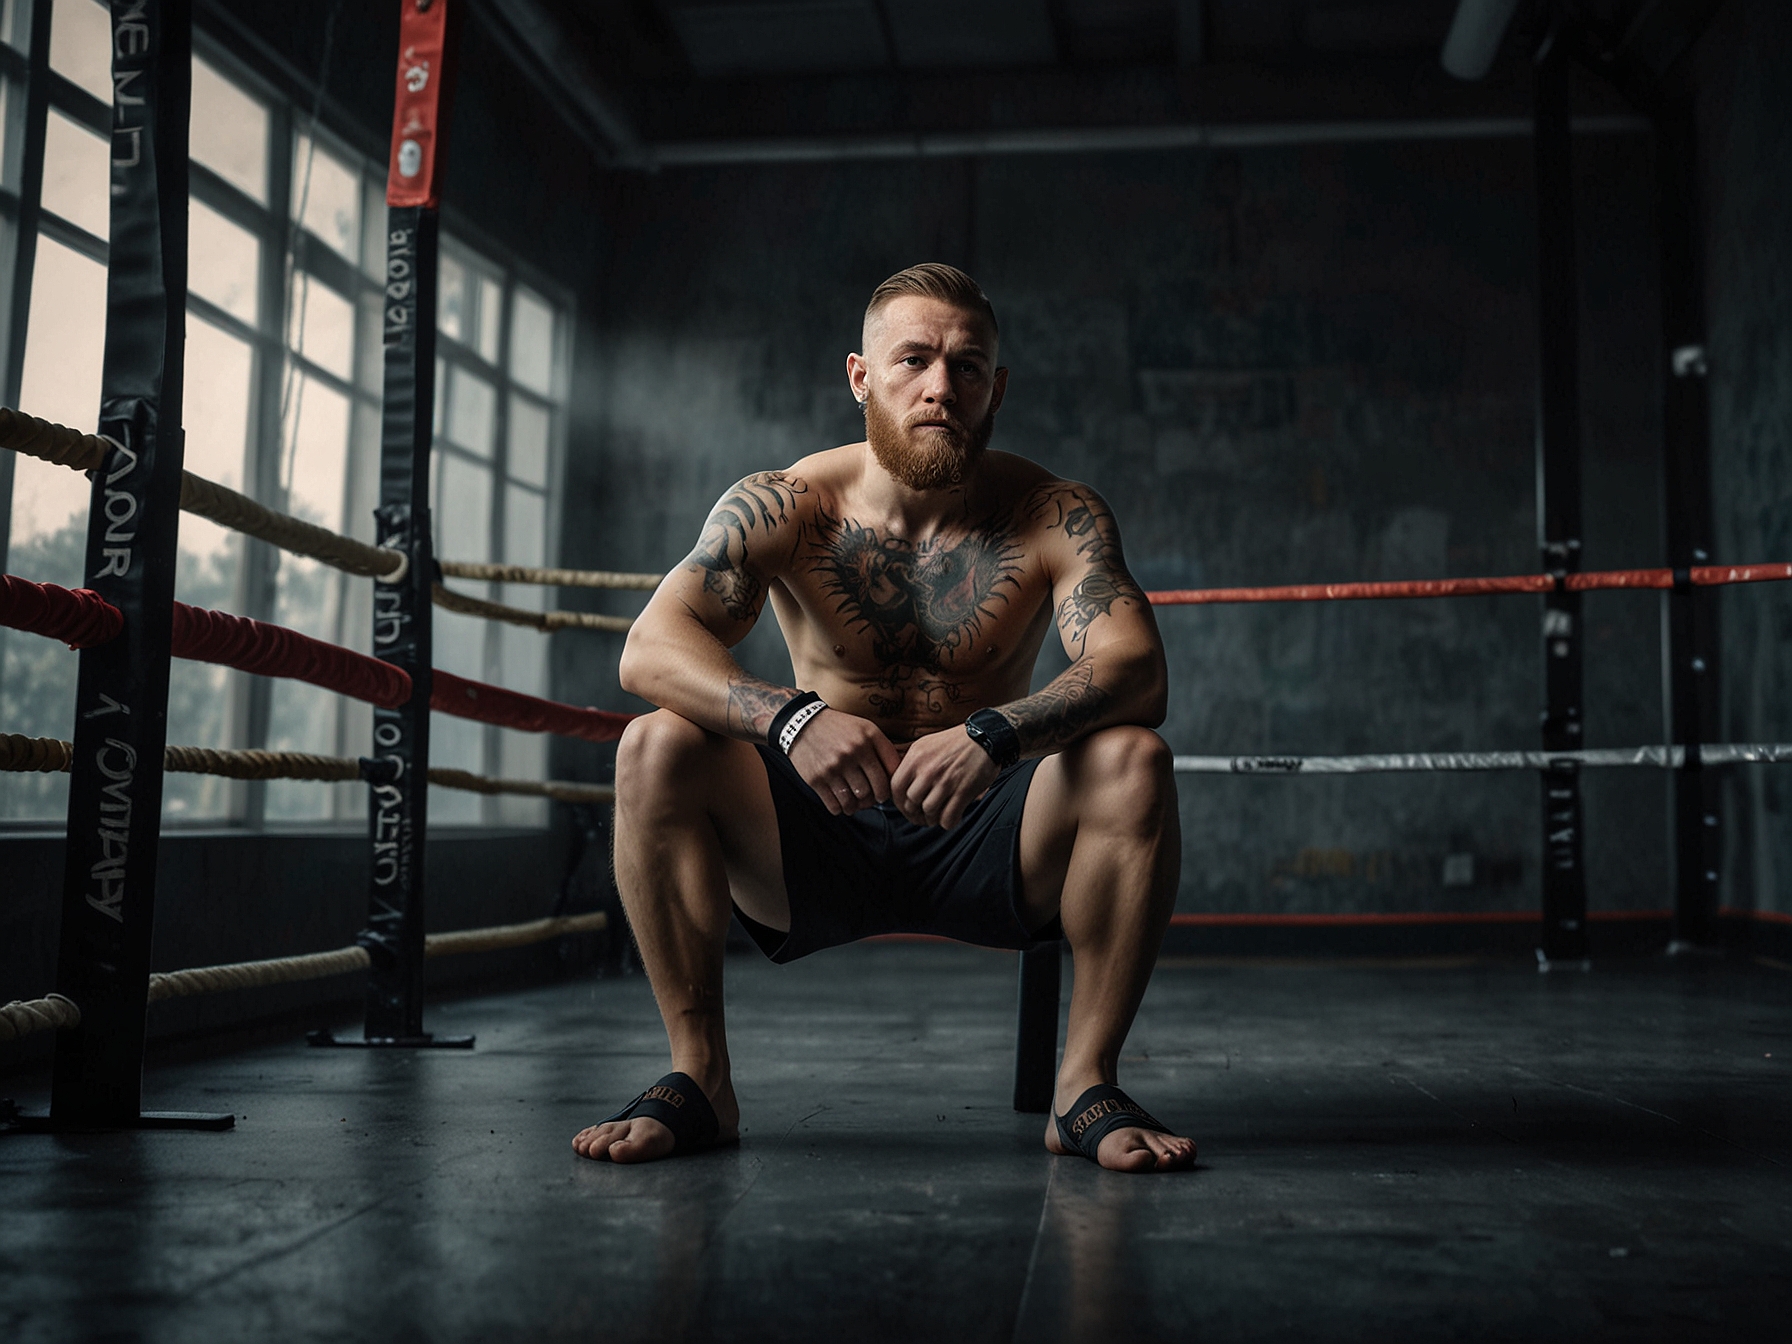 Conor McGregor, wearing slippers due to a broken toe, is shown in a training environment. His determined expression highlights his focus on recovery and preparation for a summer MMA comeback.